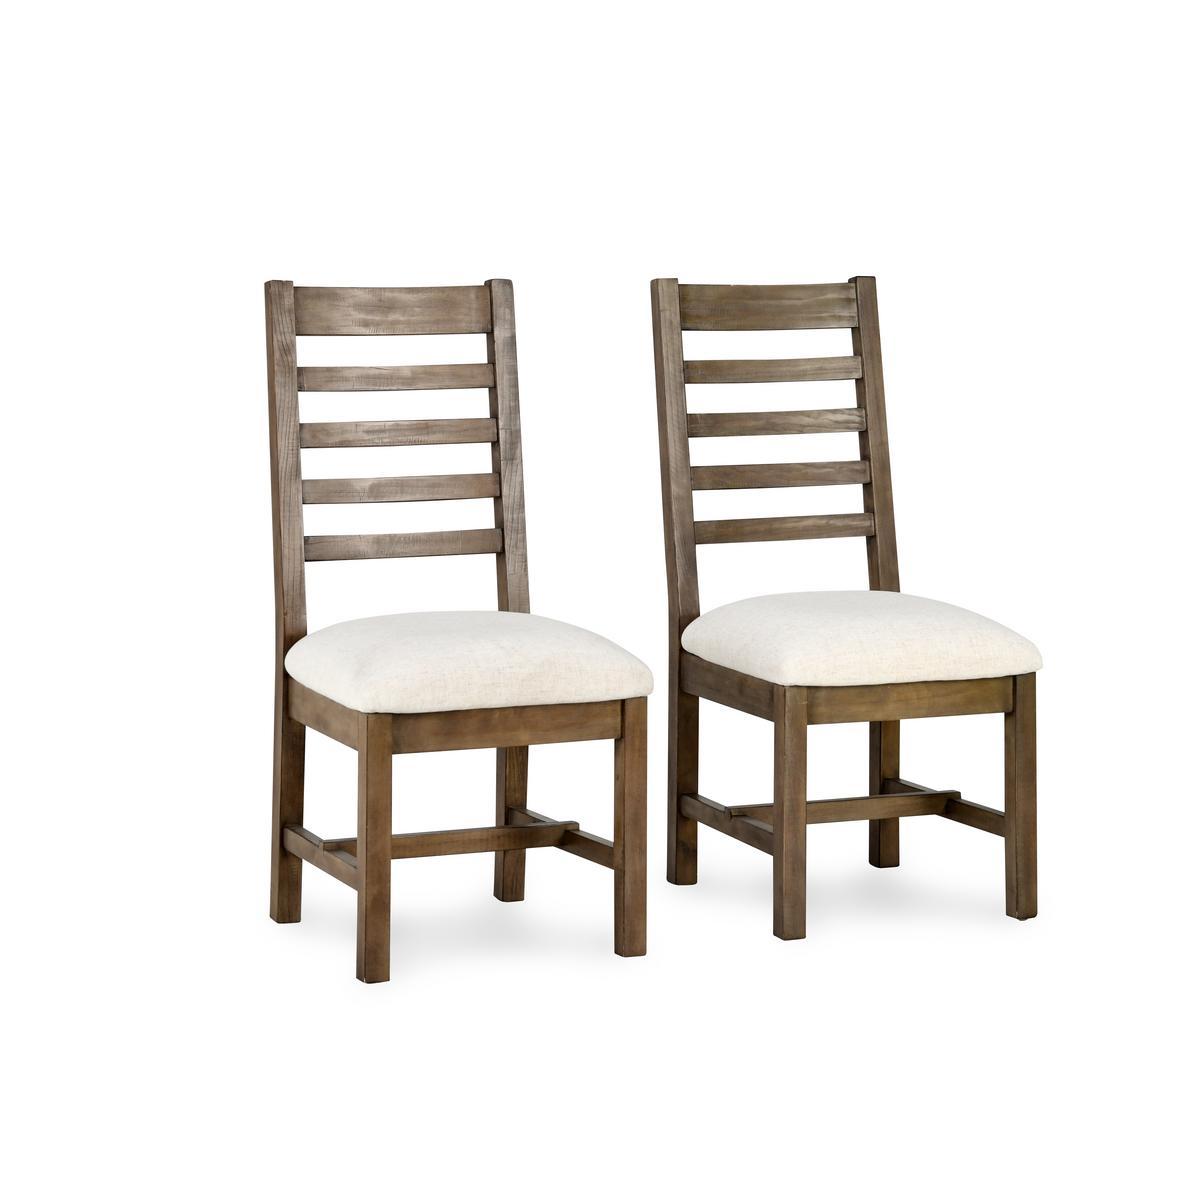 Caleb - Upholstered Dining Chair (Set of 2) - Distressed Brown